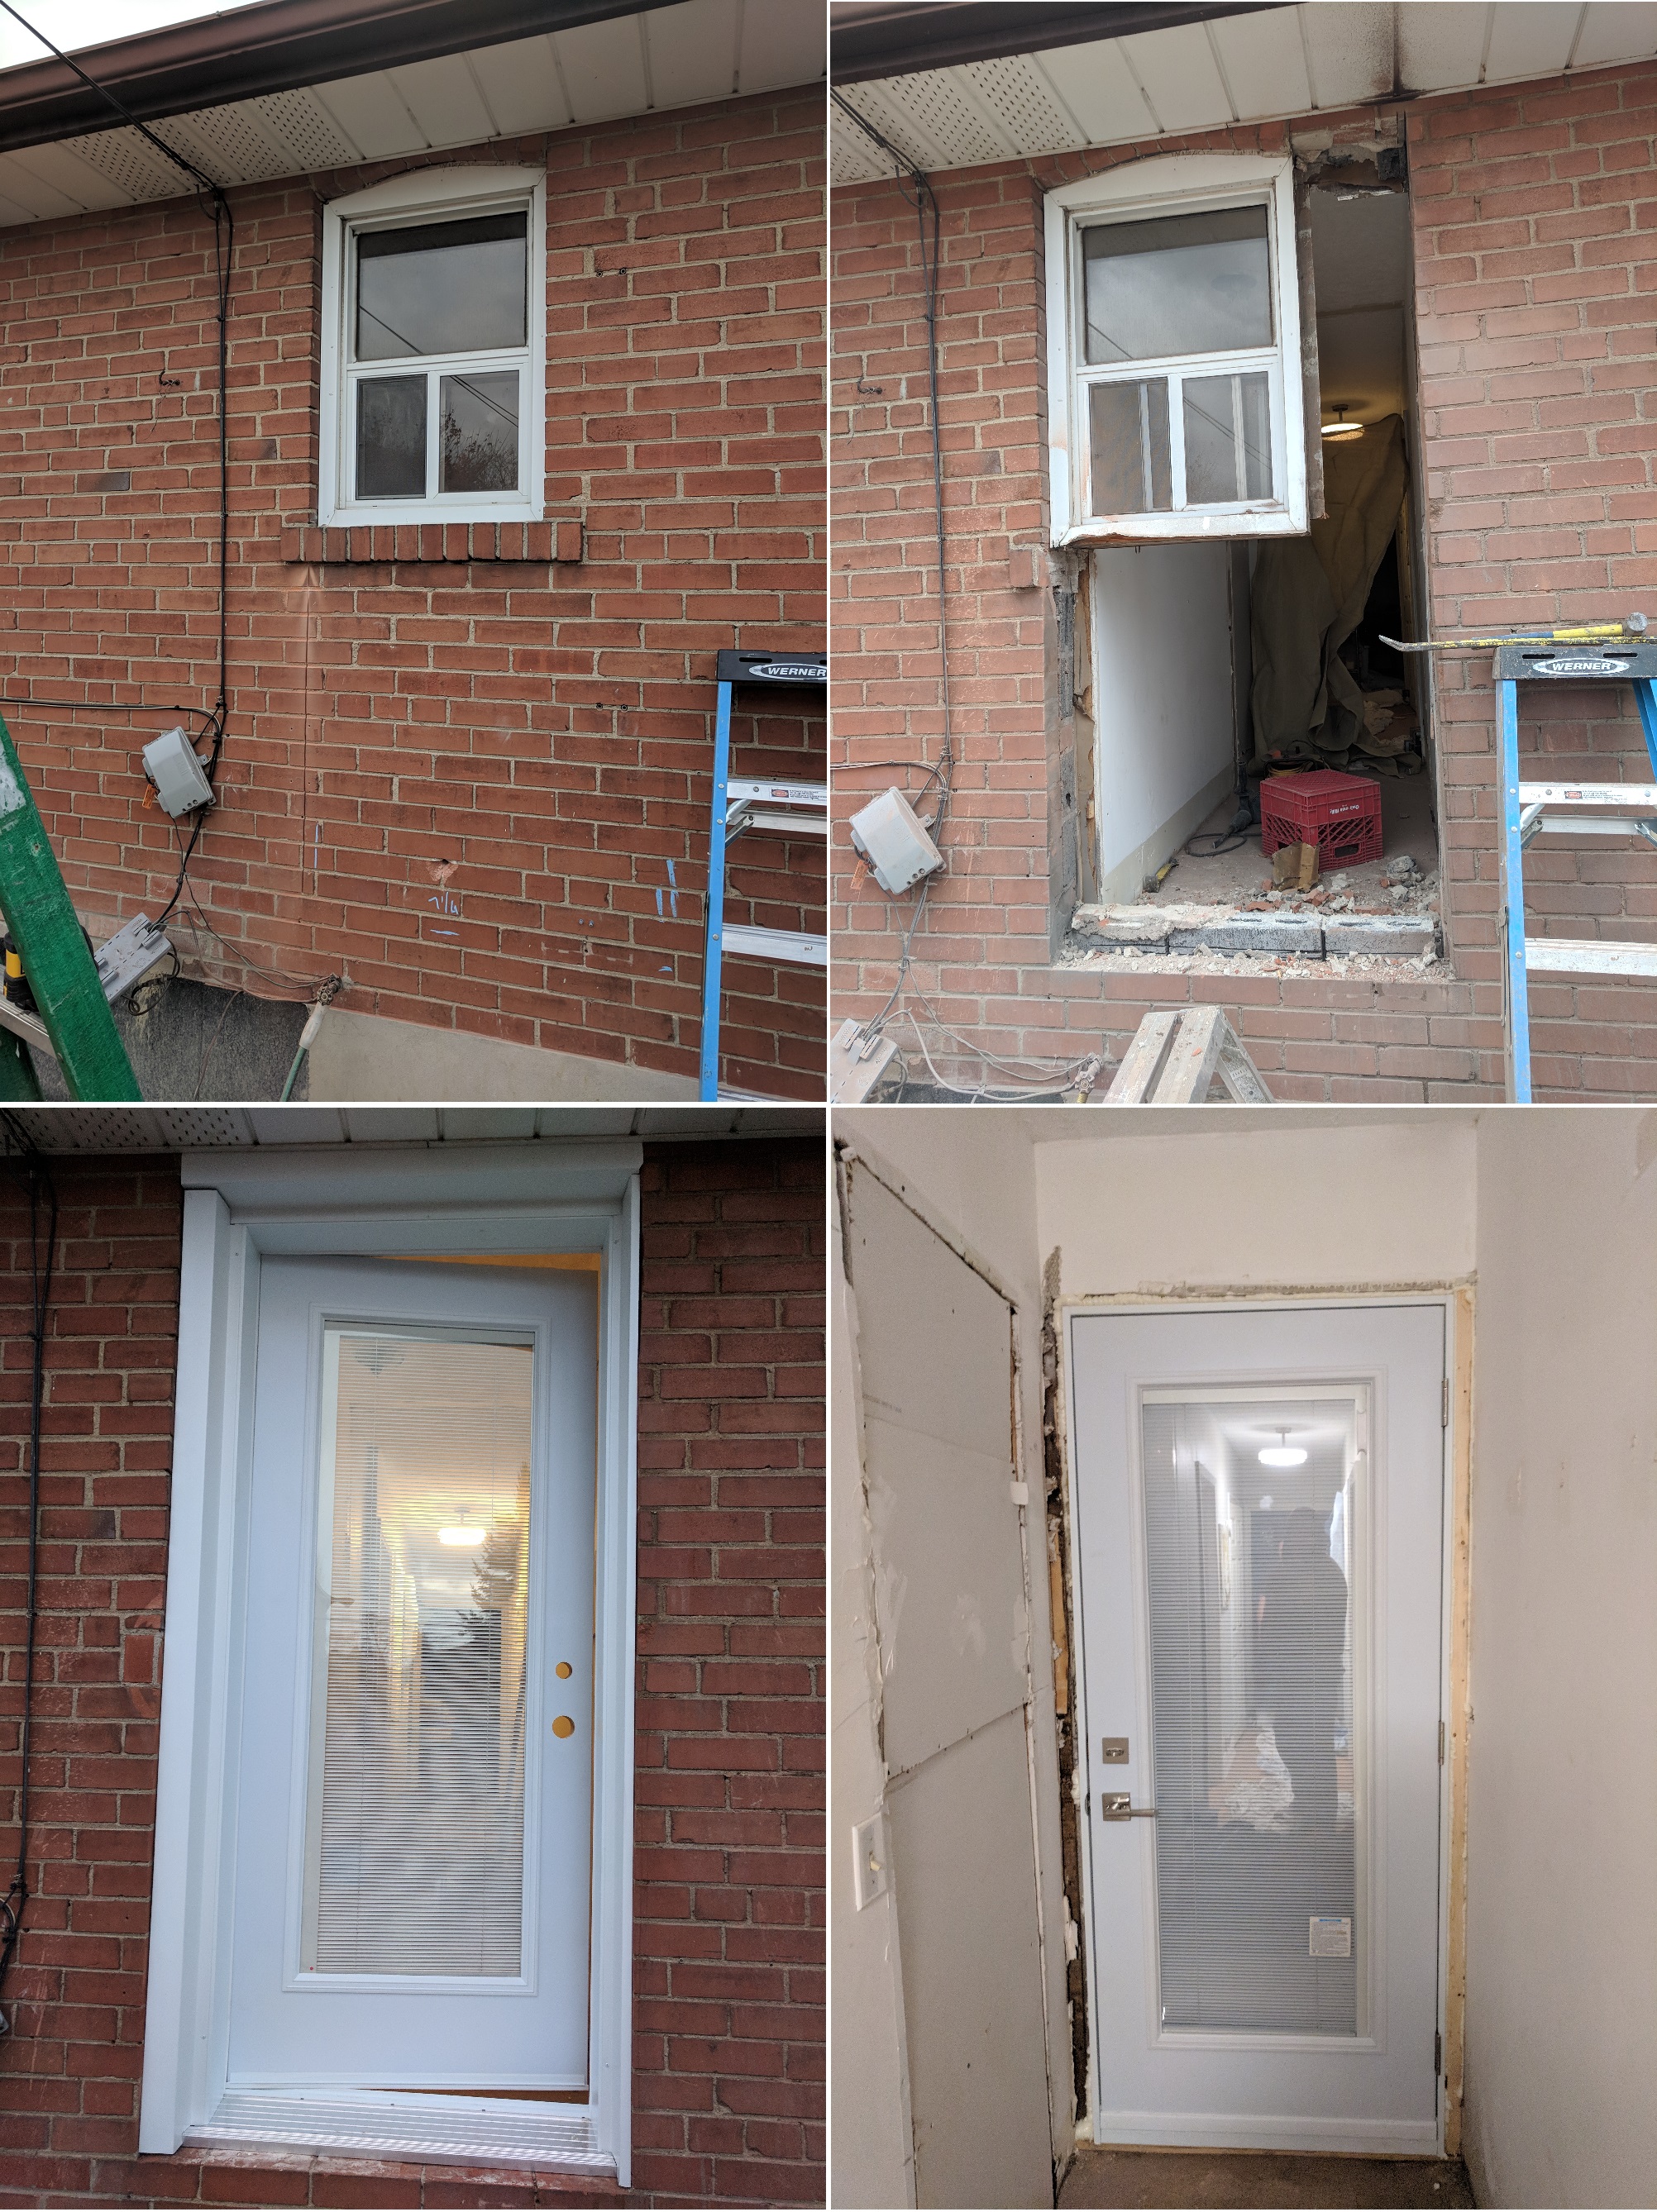 Cutting a brick. Converting an existing window into a single inswing patio door. Cut brick, aluminum capping flashing outside. No casing inside. Patio door with internal (tilt and lift) mini blinds.